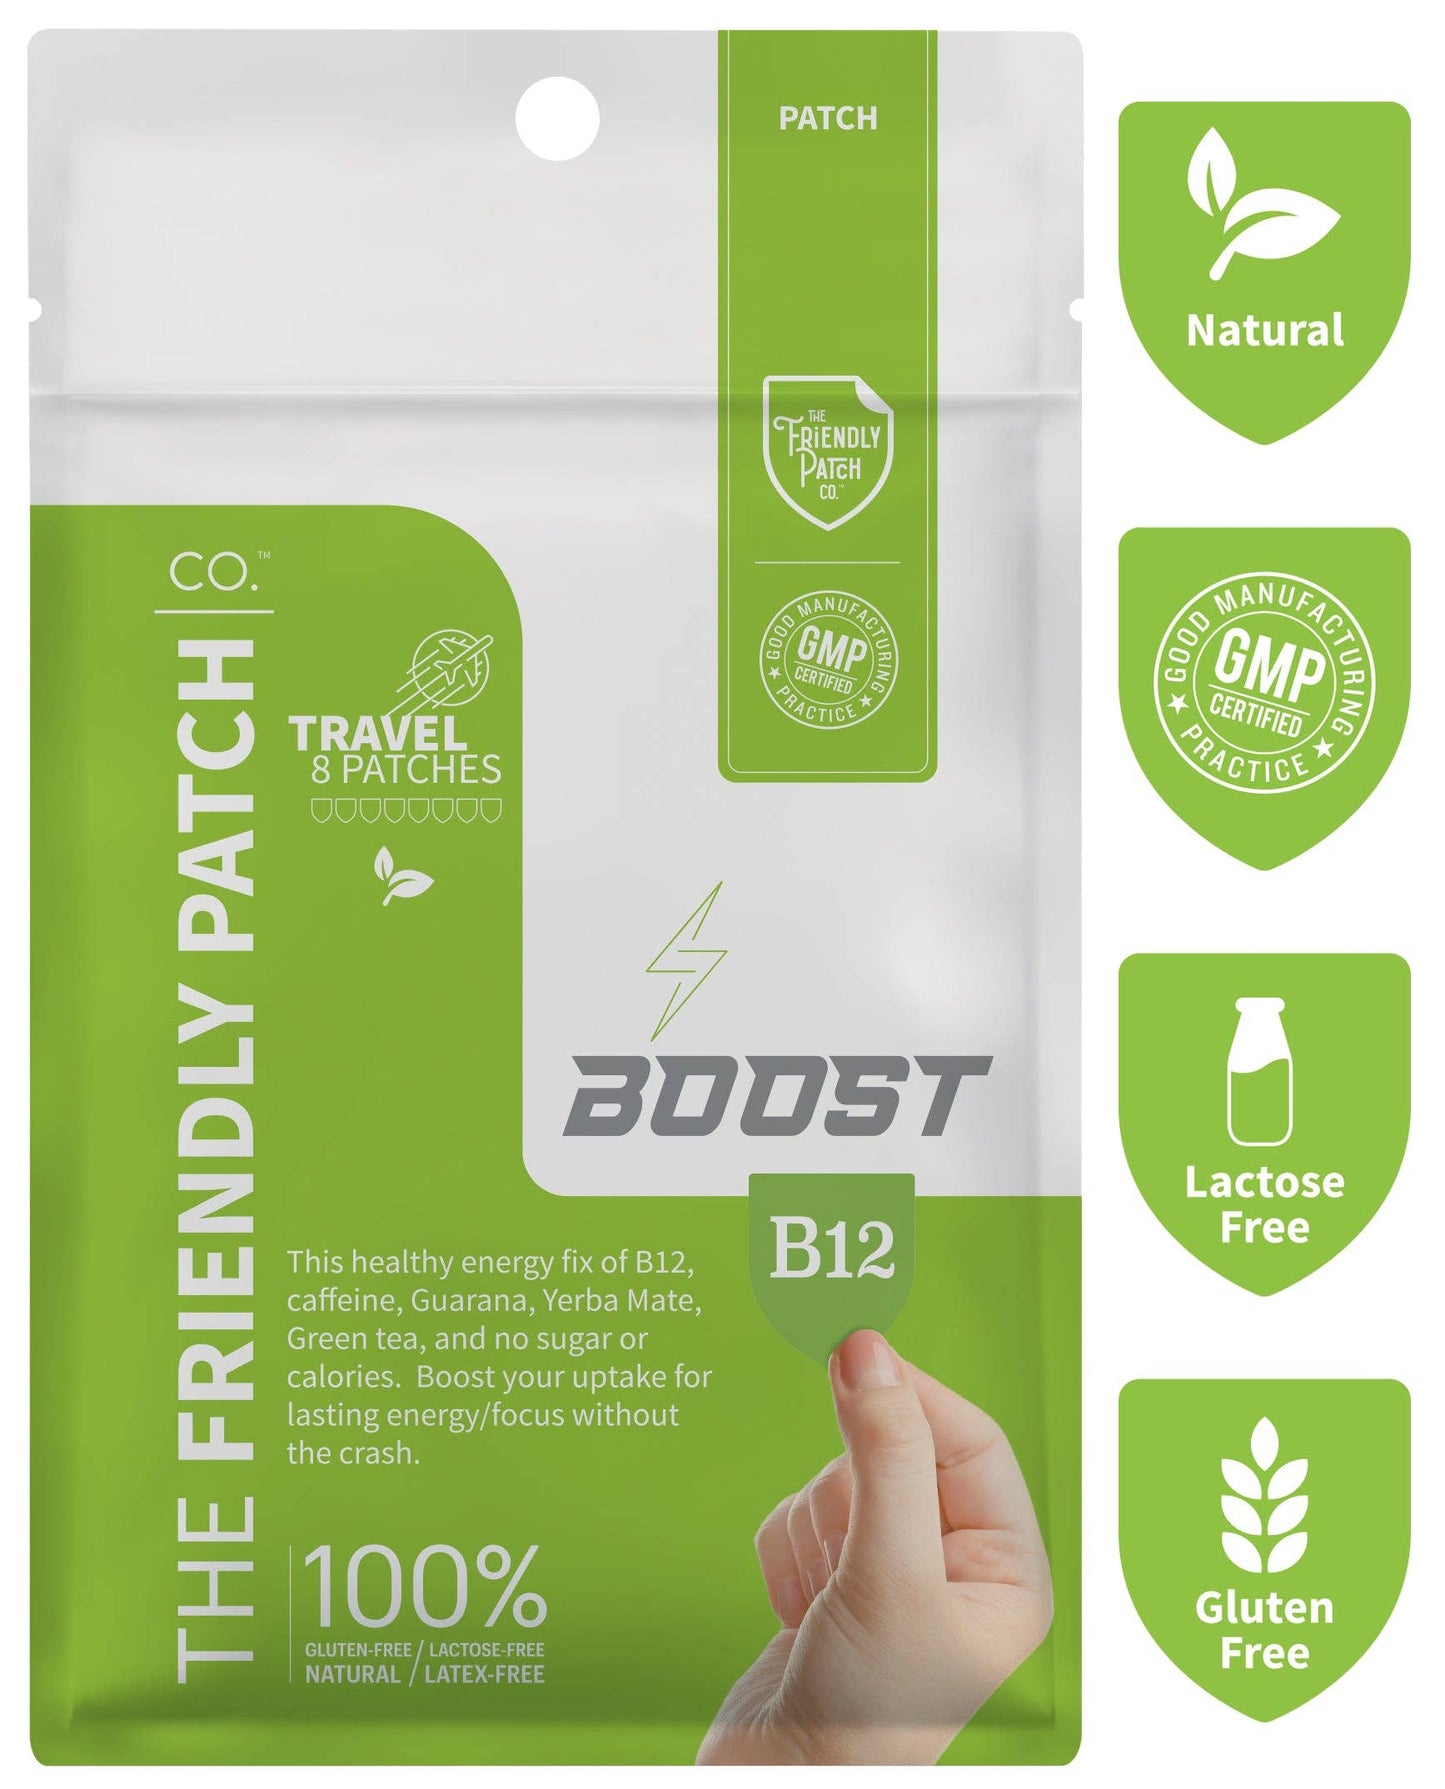 Friendly Patch CO - Boost energy Patch - Travel Pack ( 8 patches per pack)